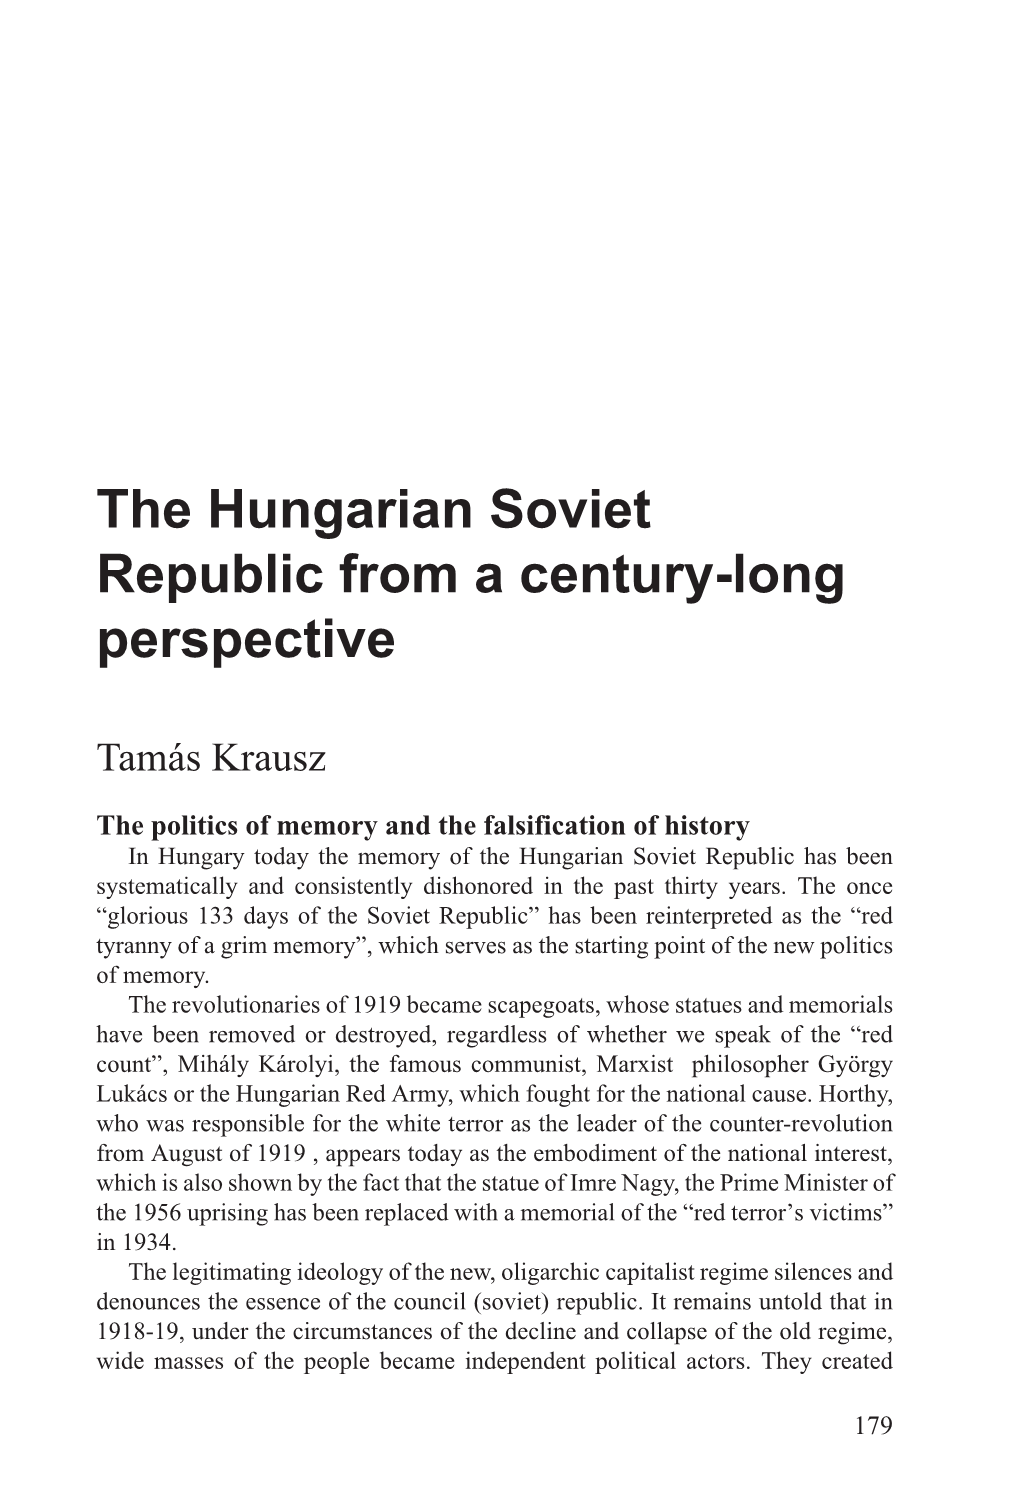 The Hungarian Soviet Republic from a Century-Long Perspective